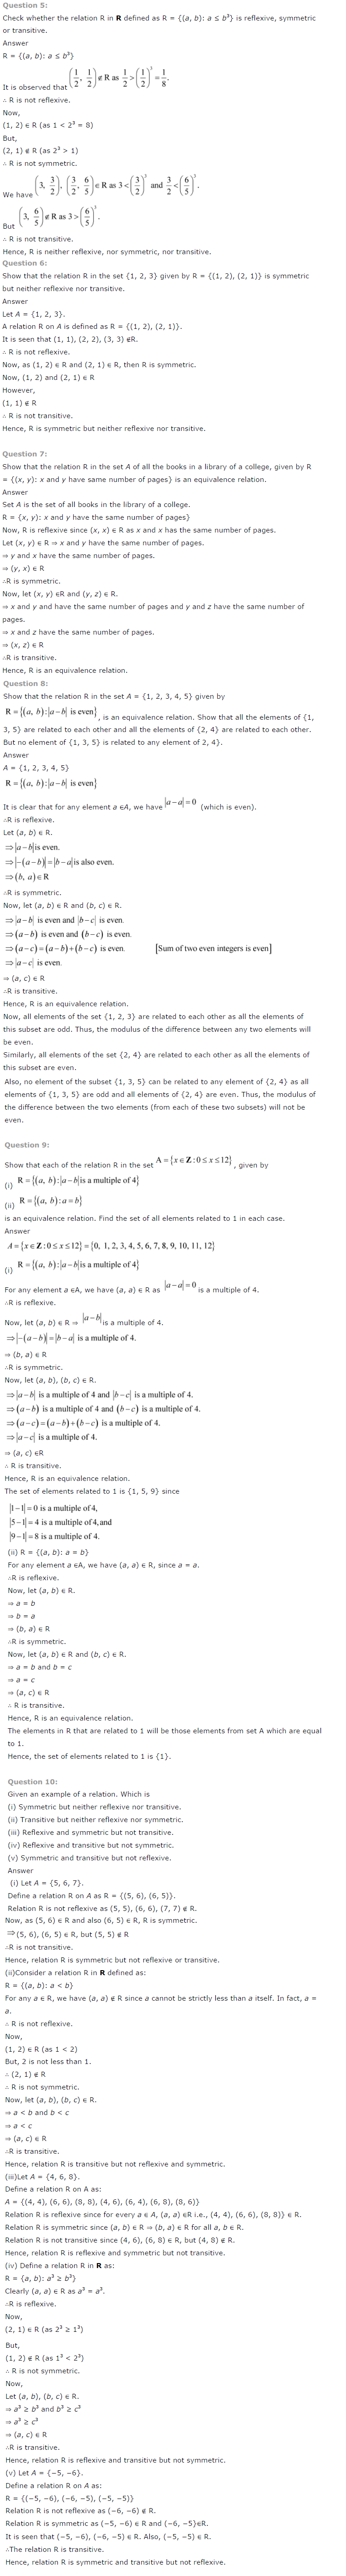 NCERT Solutions For Class 12 Maths Chapter 1 Relations and Functions 2